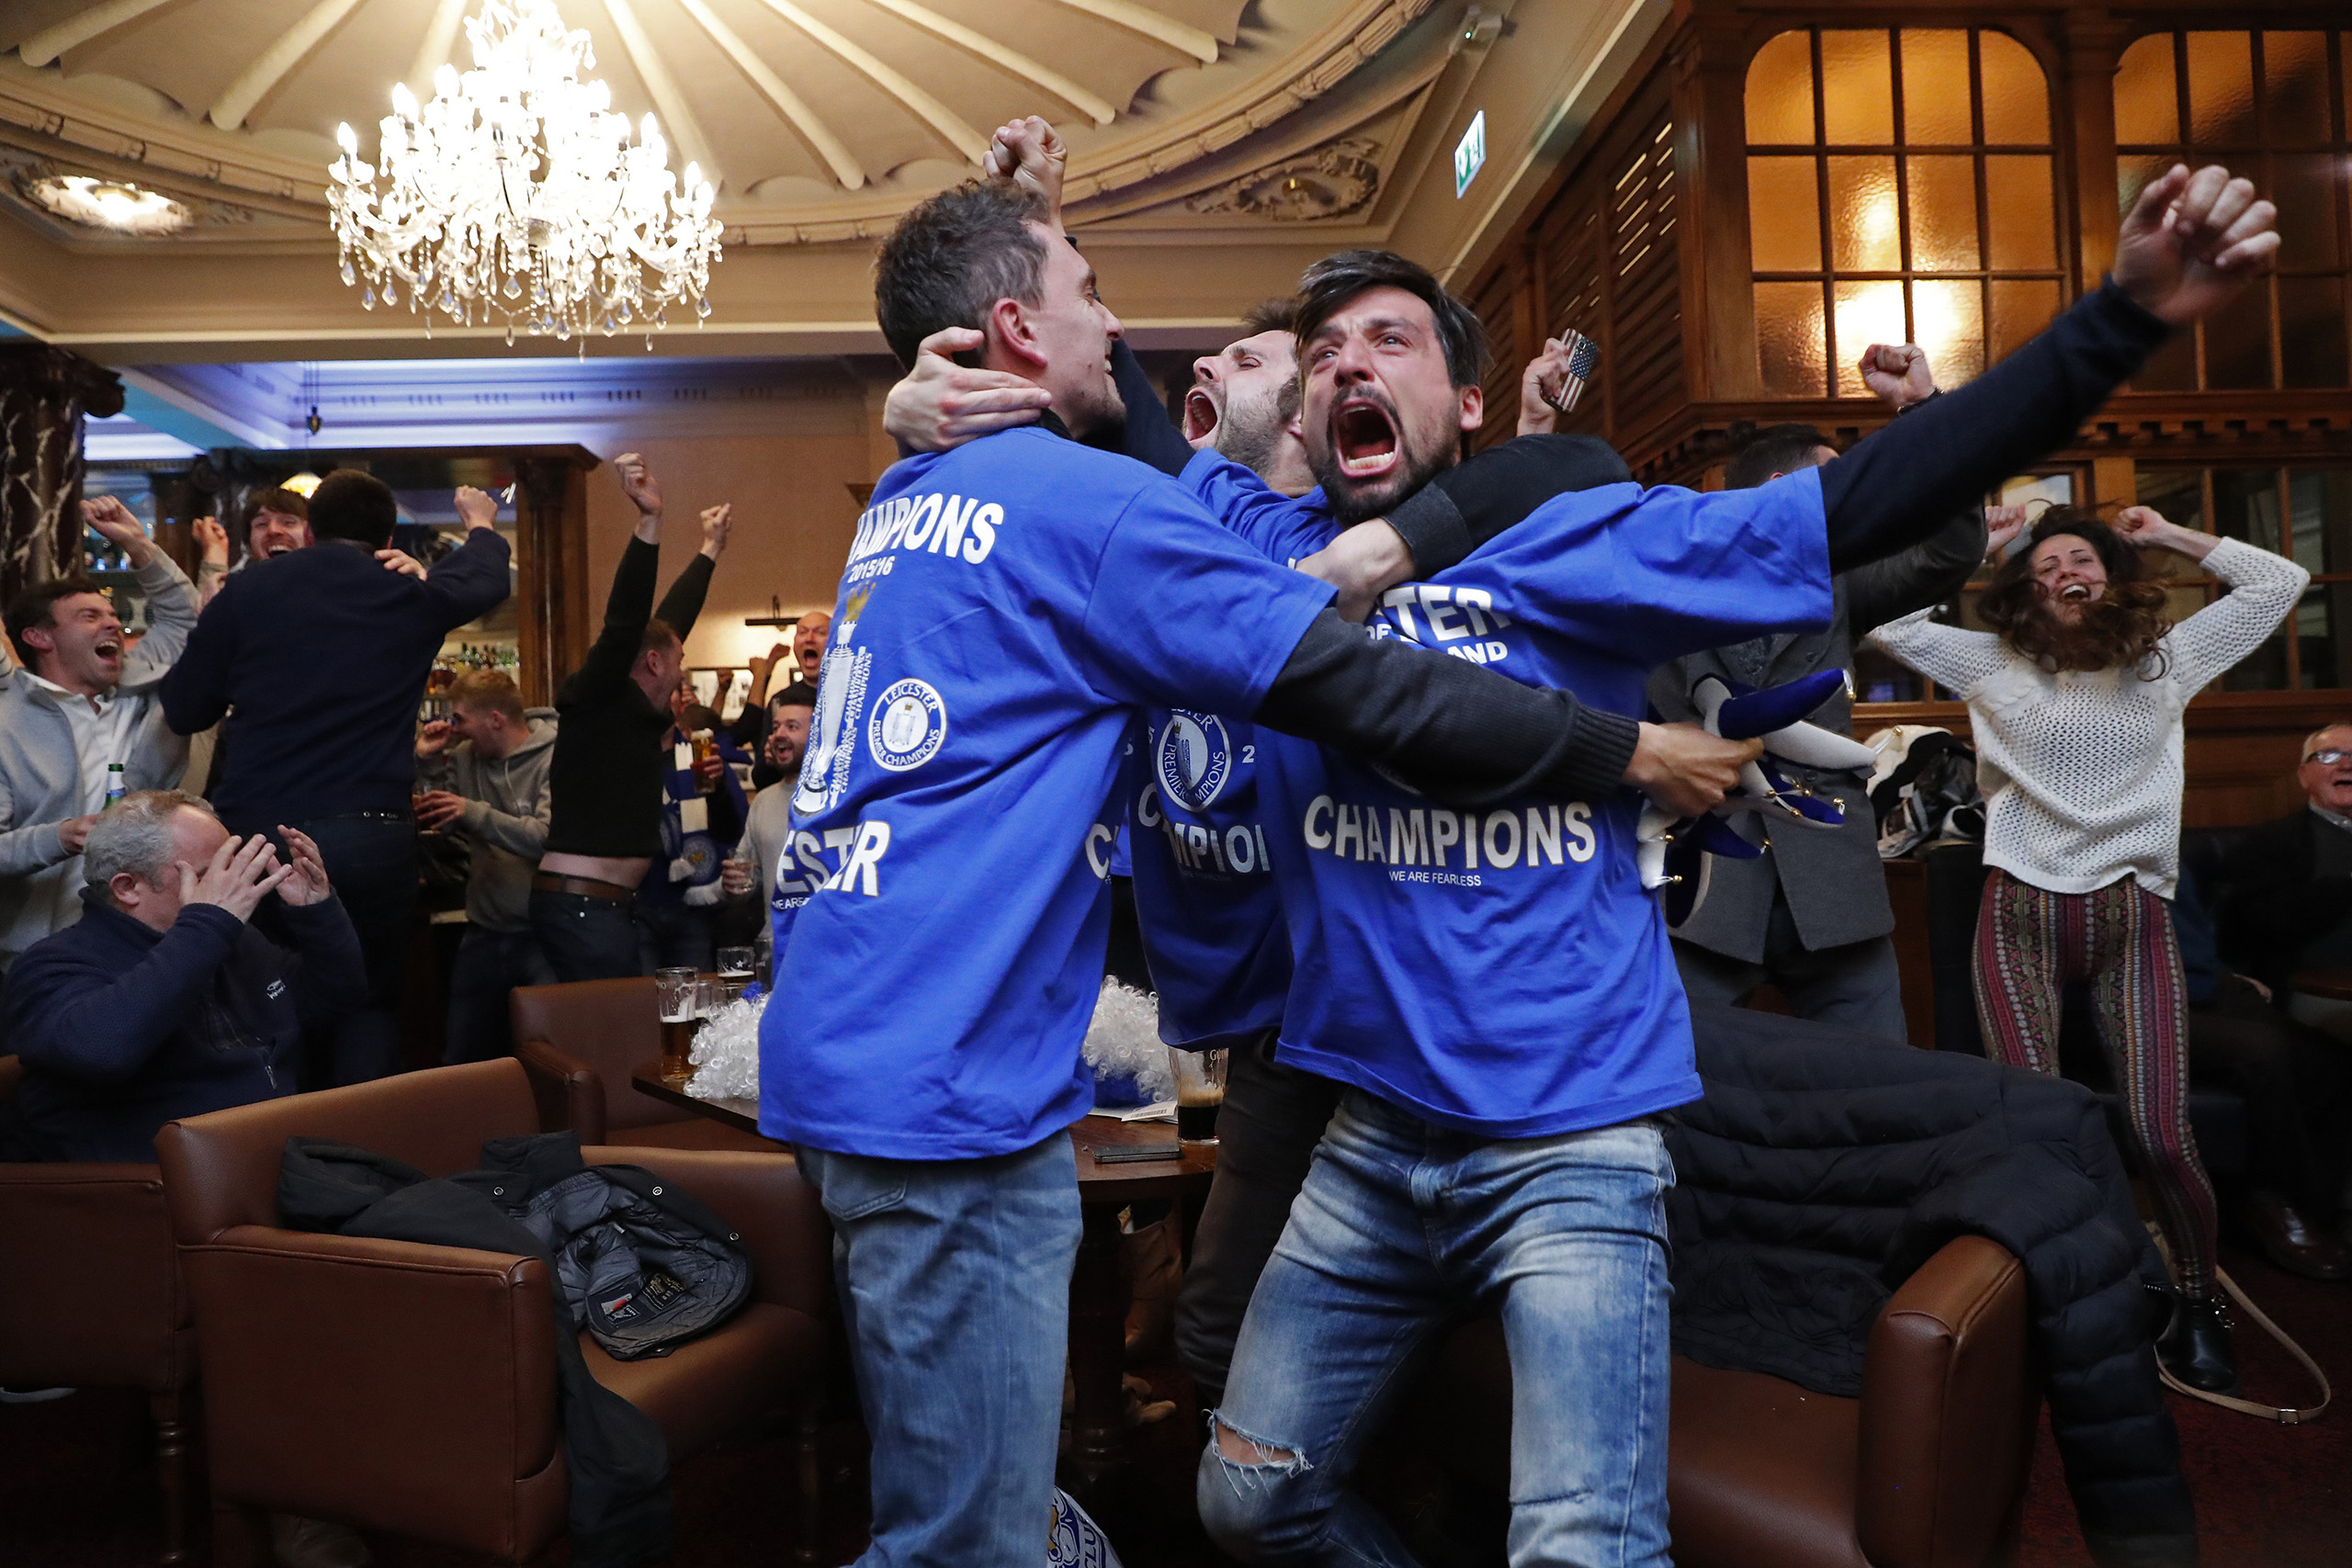 Leicester City fans celebrate after Chelsea's second goal against Tottenham Hotspur at a pub in Leicester, eastern England, May 2, 2016. (Eddie Keogh—Reuters)